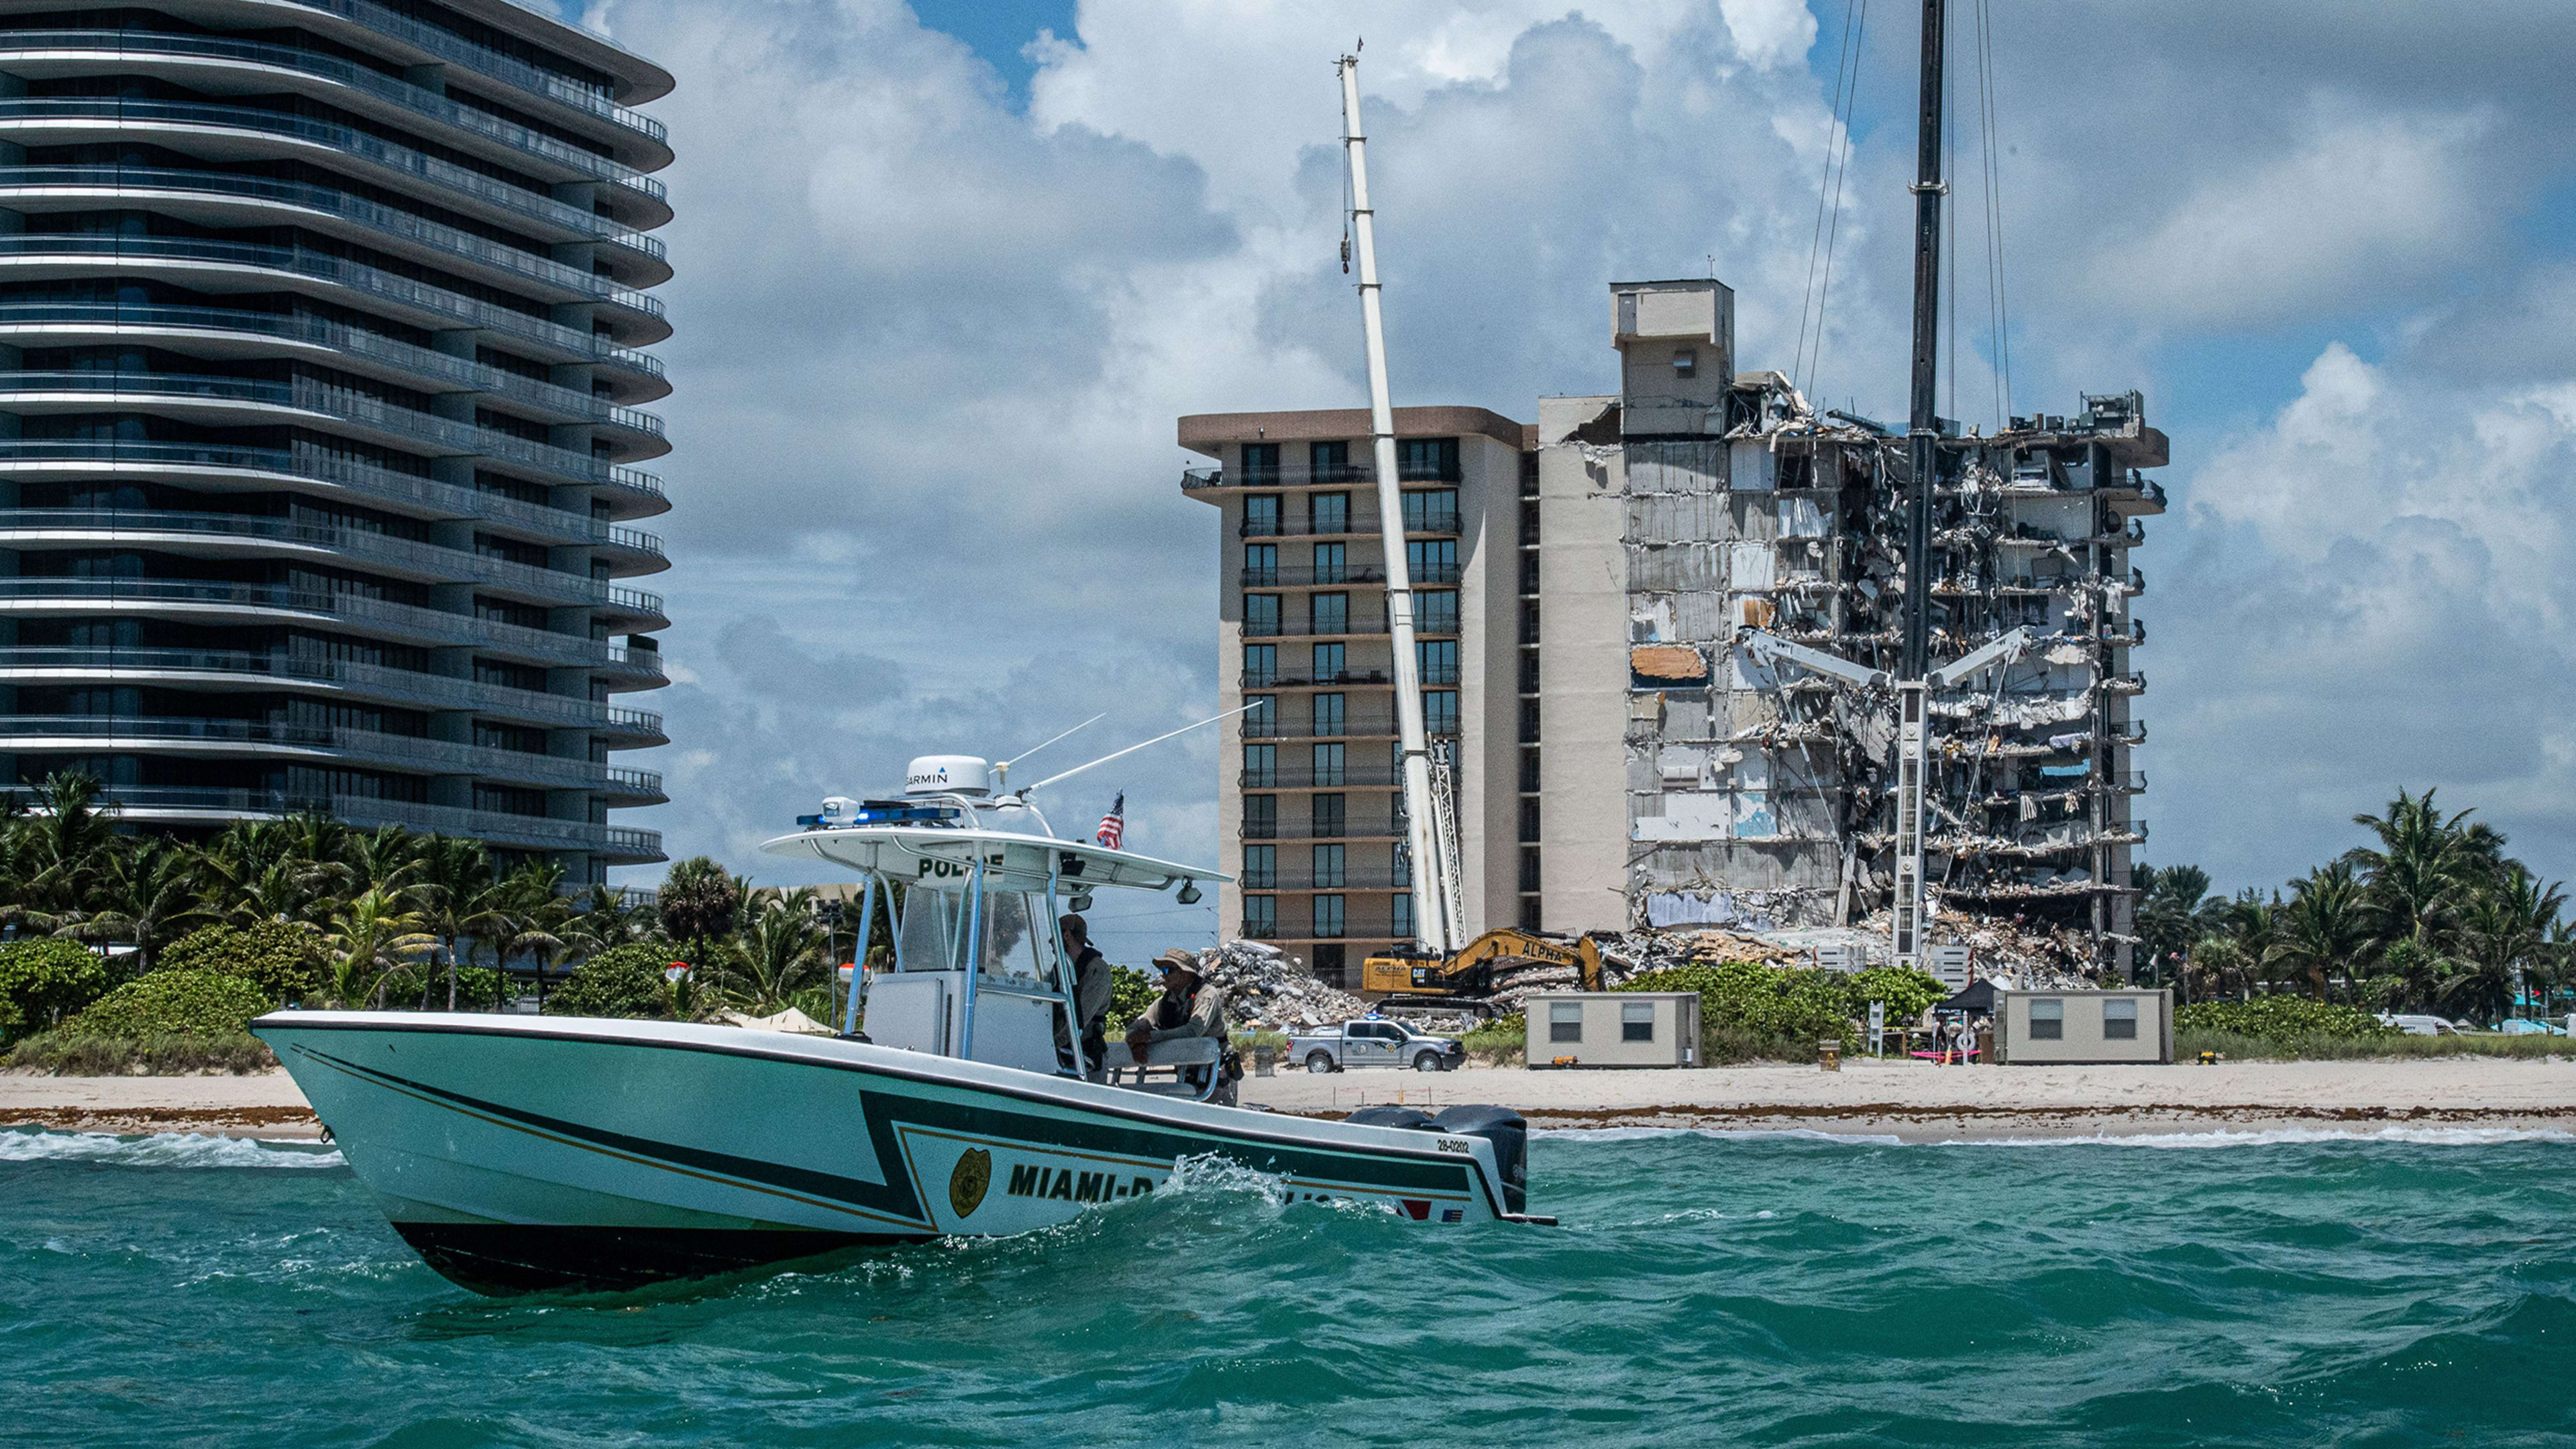 A freak accident or the first of many disasters? A look at why the Miami condo building may have collapsed